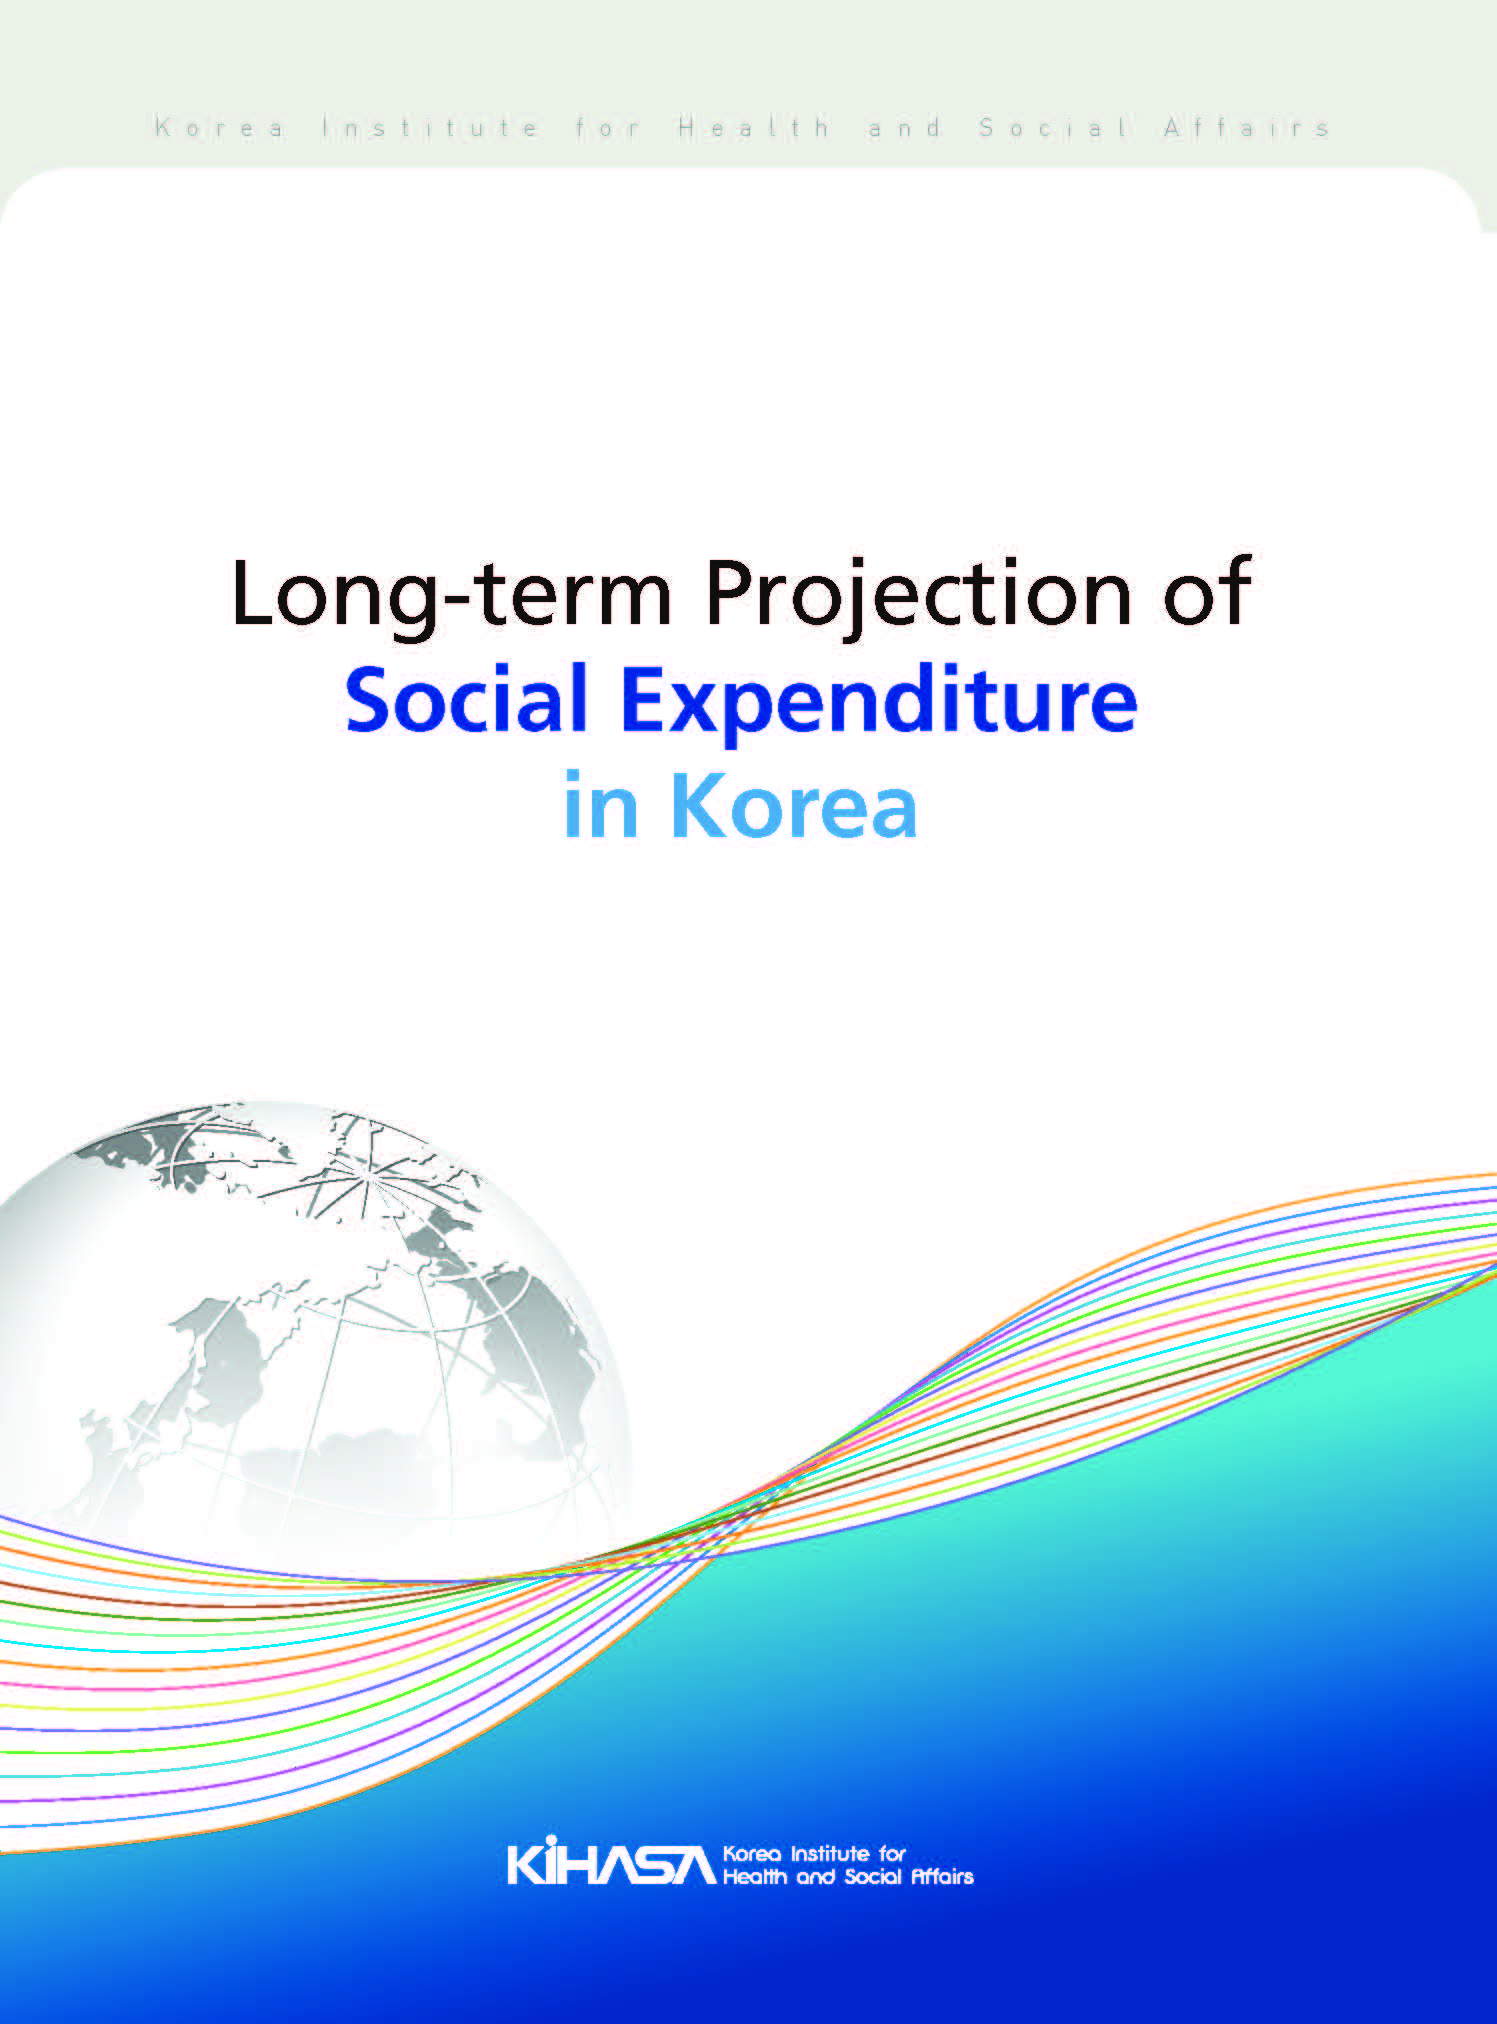 Long-term Projection of Social Expenditure in Korea